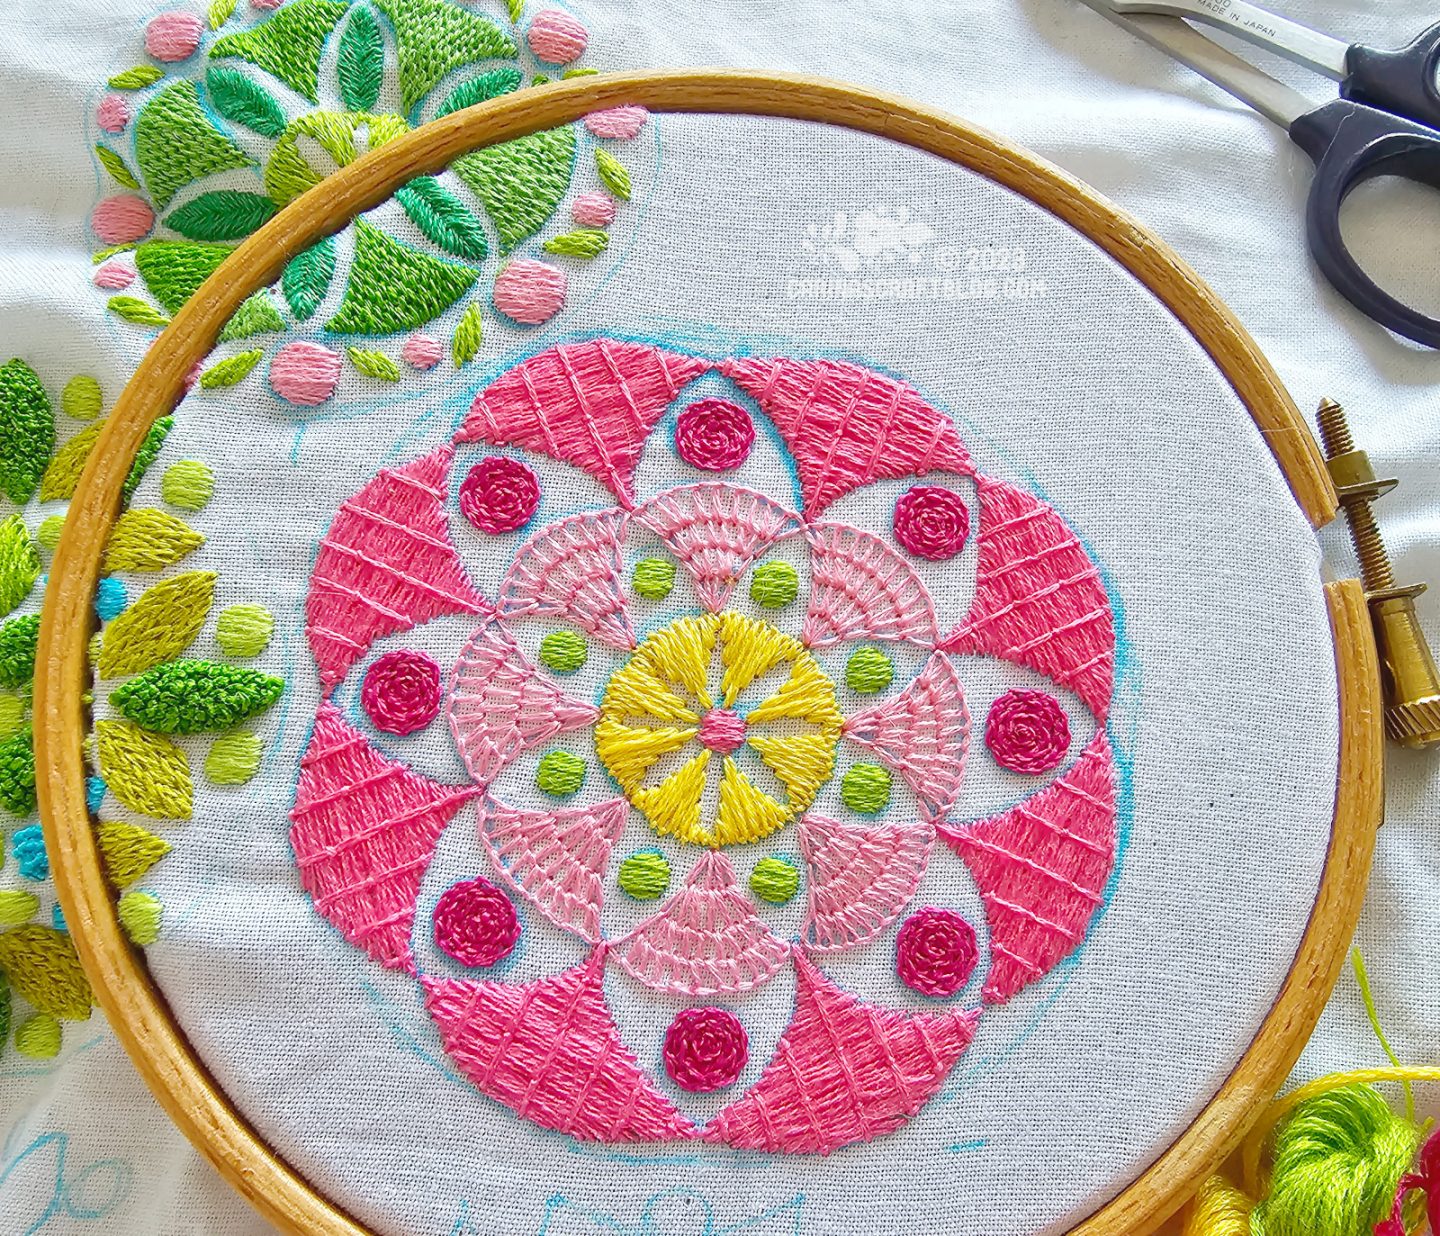 Close overhead view of a wooden embroidery hoop with white fabric. On the fabric is embroidered a mandala inspired design in pink, yellow and green colours.